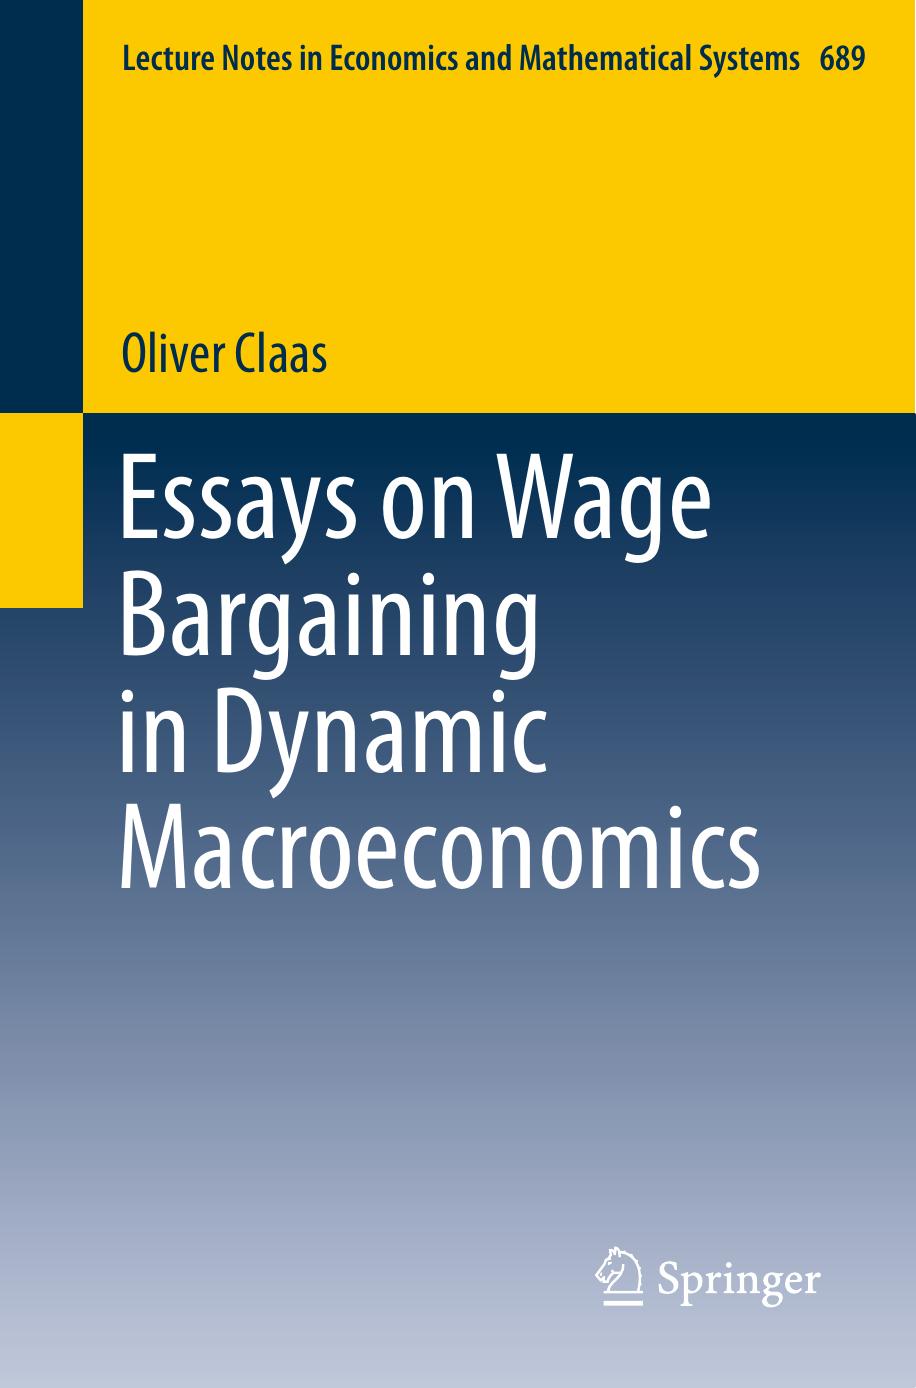 Essays on Wage Bargaining in Dynamic Macroeconomics by Oliver Claas